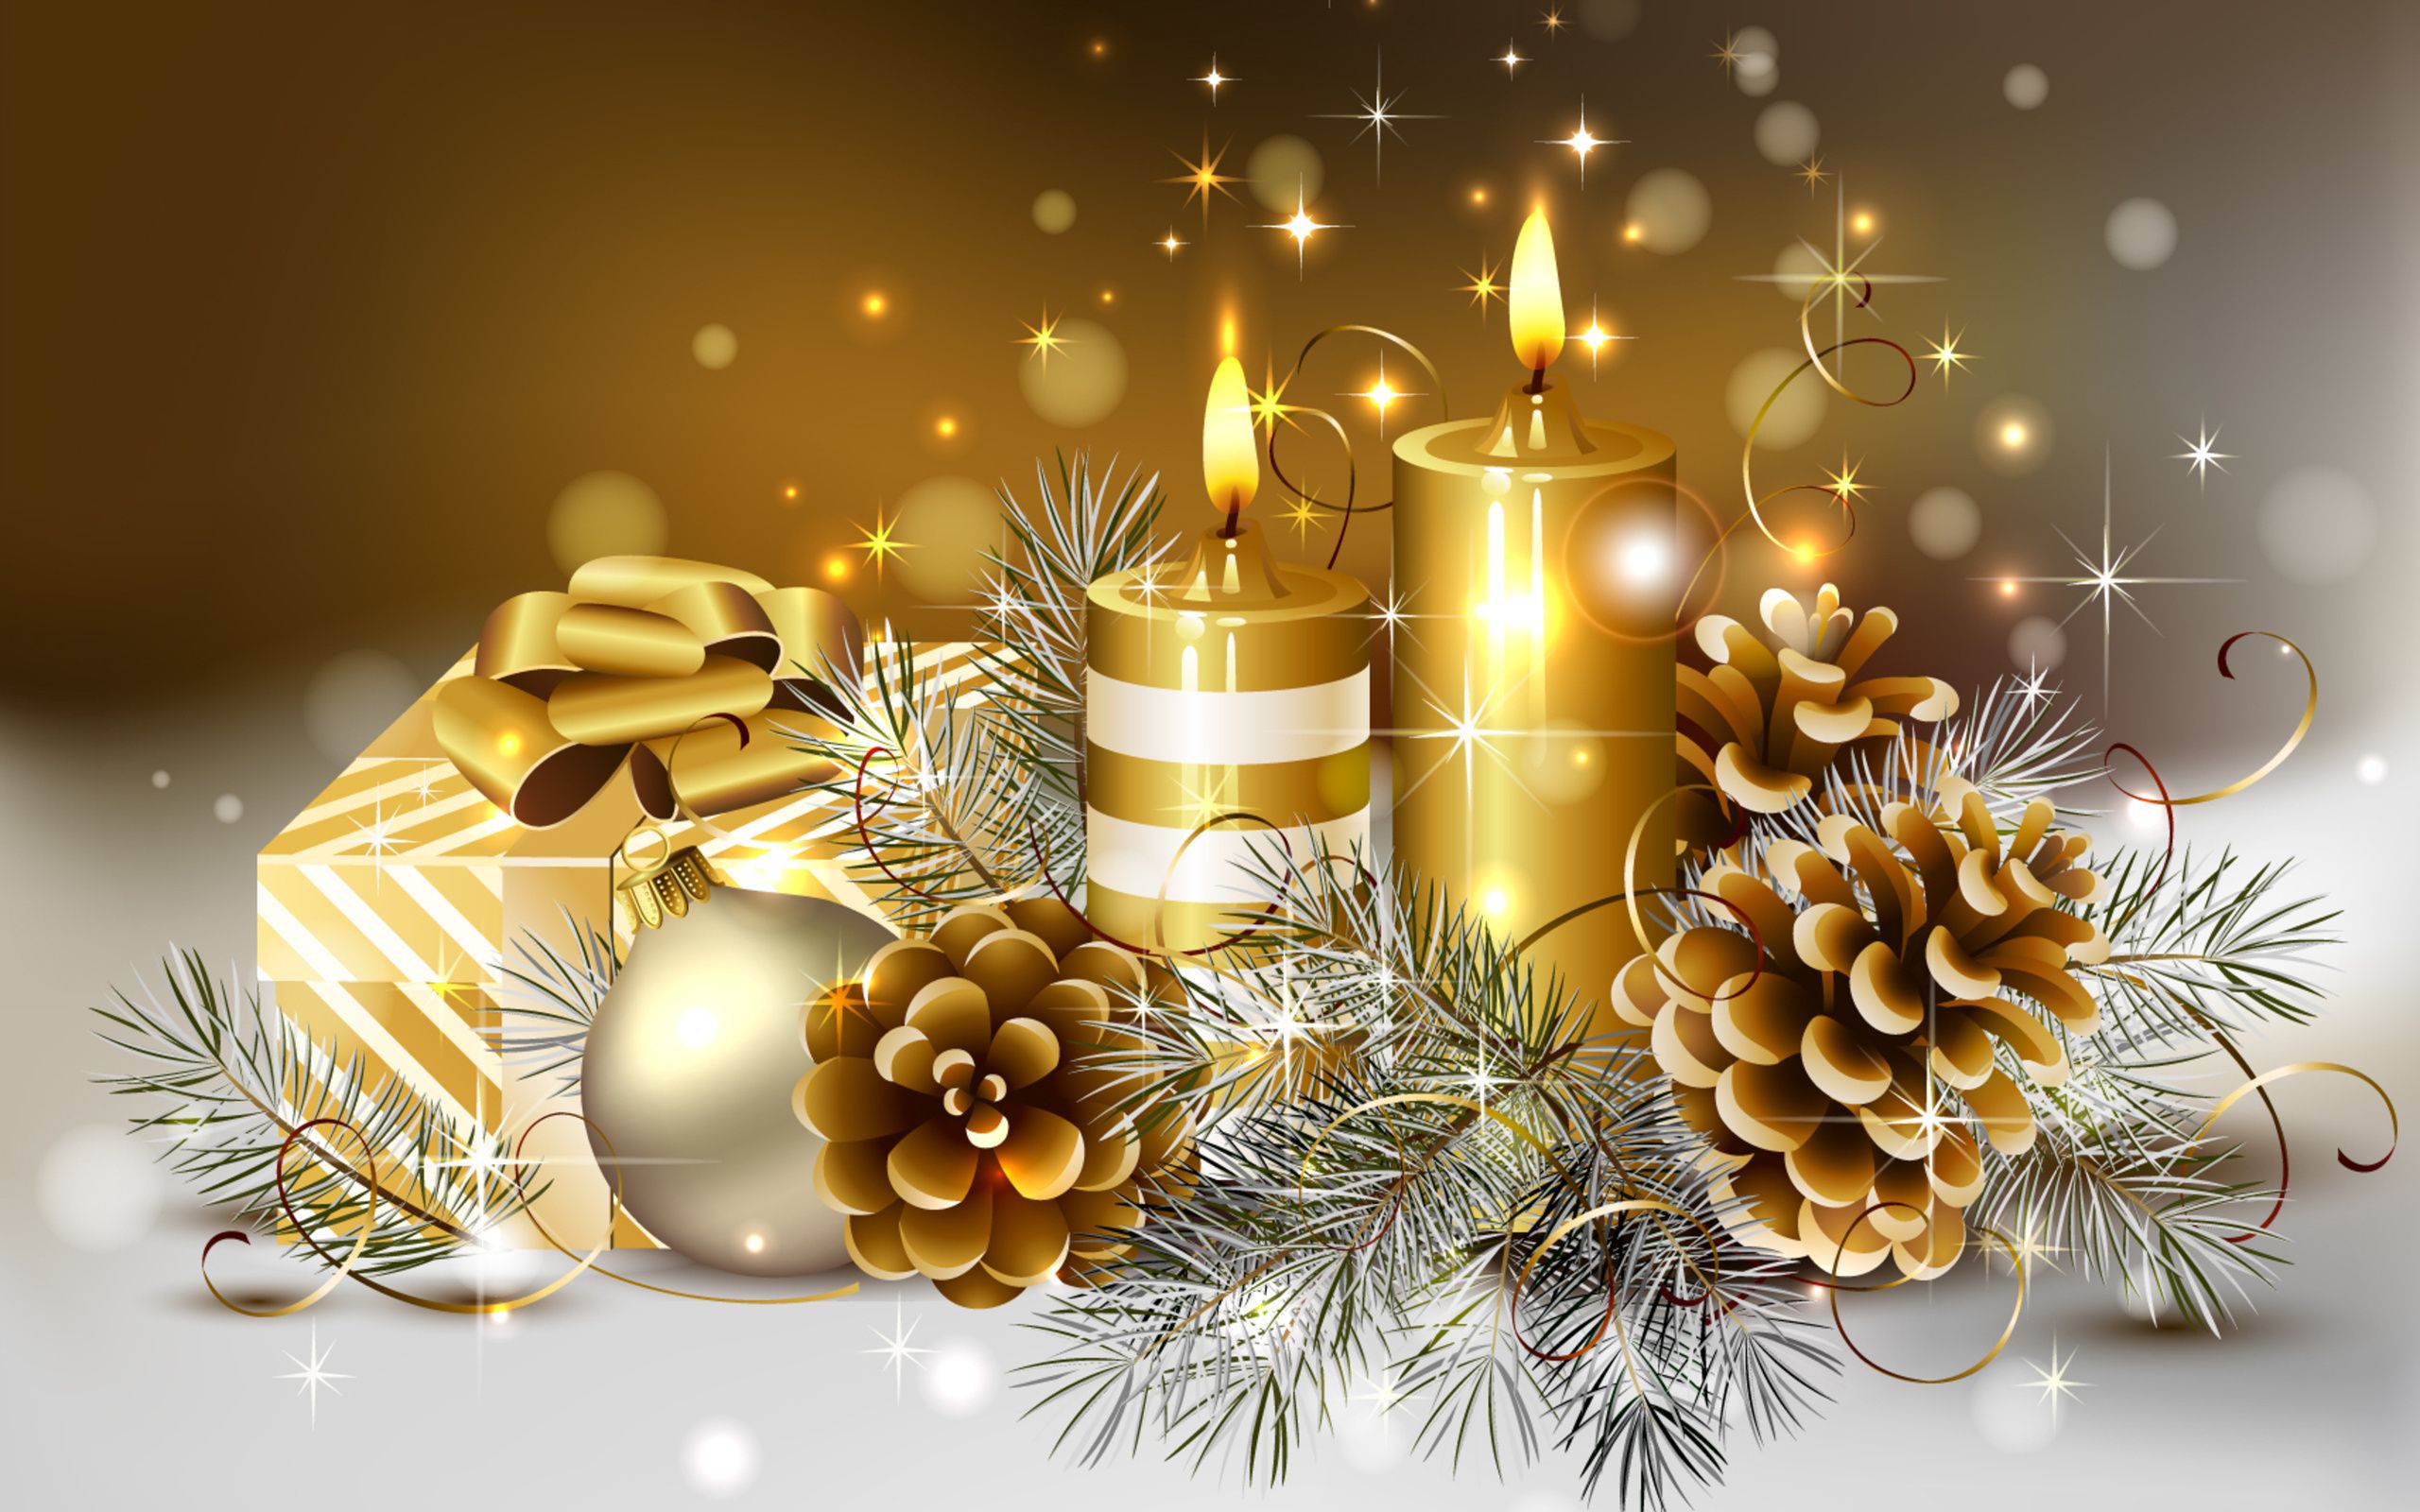 Wallpaper. New Year. photo. picture. gold, Happy New Year, candles, sweetheart, Christmas